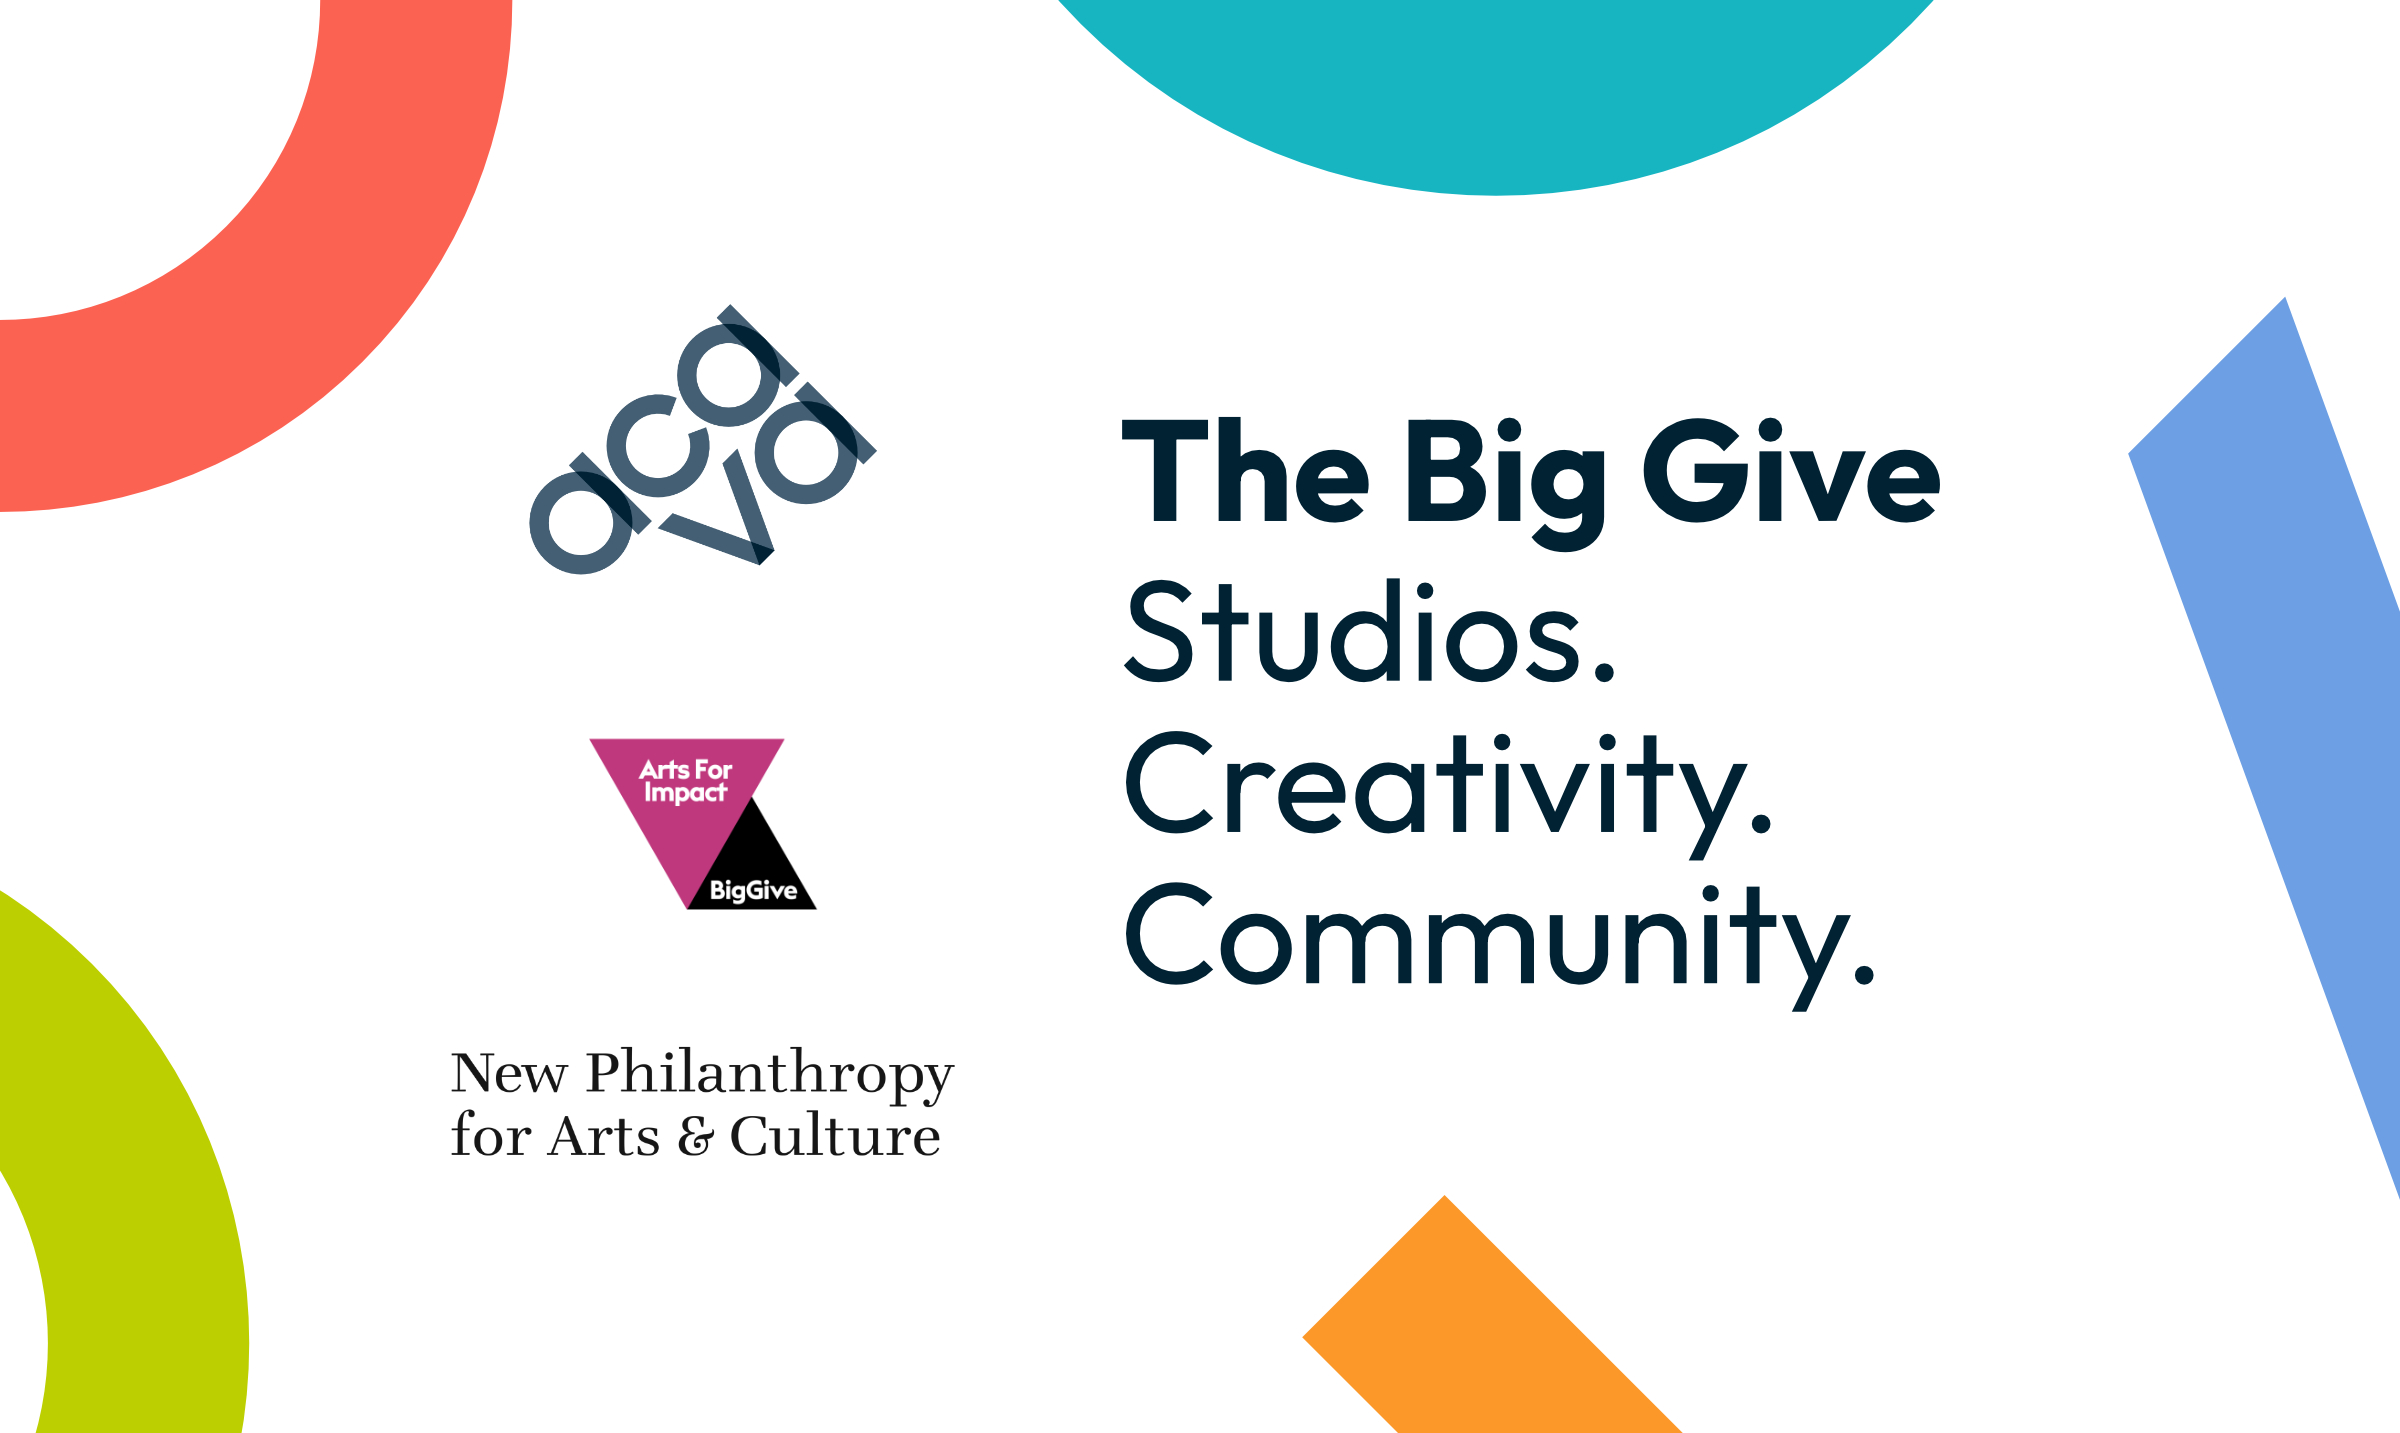 The Big Give: Double your donation 19-26 March